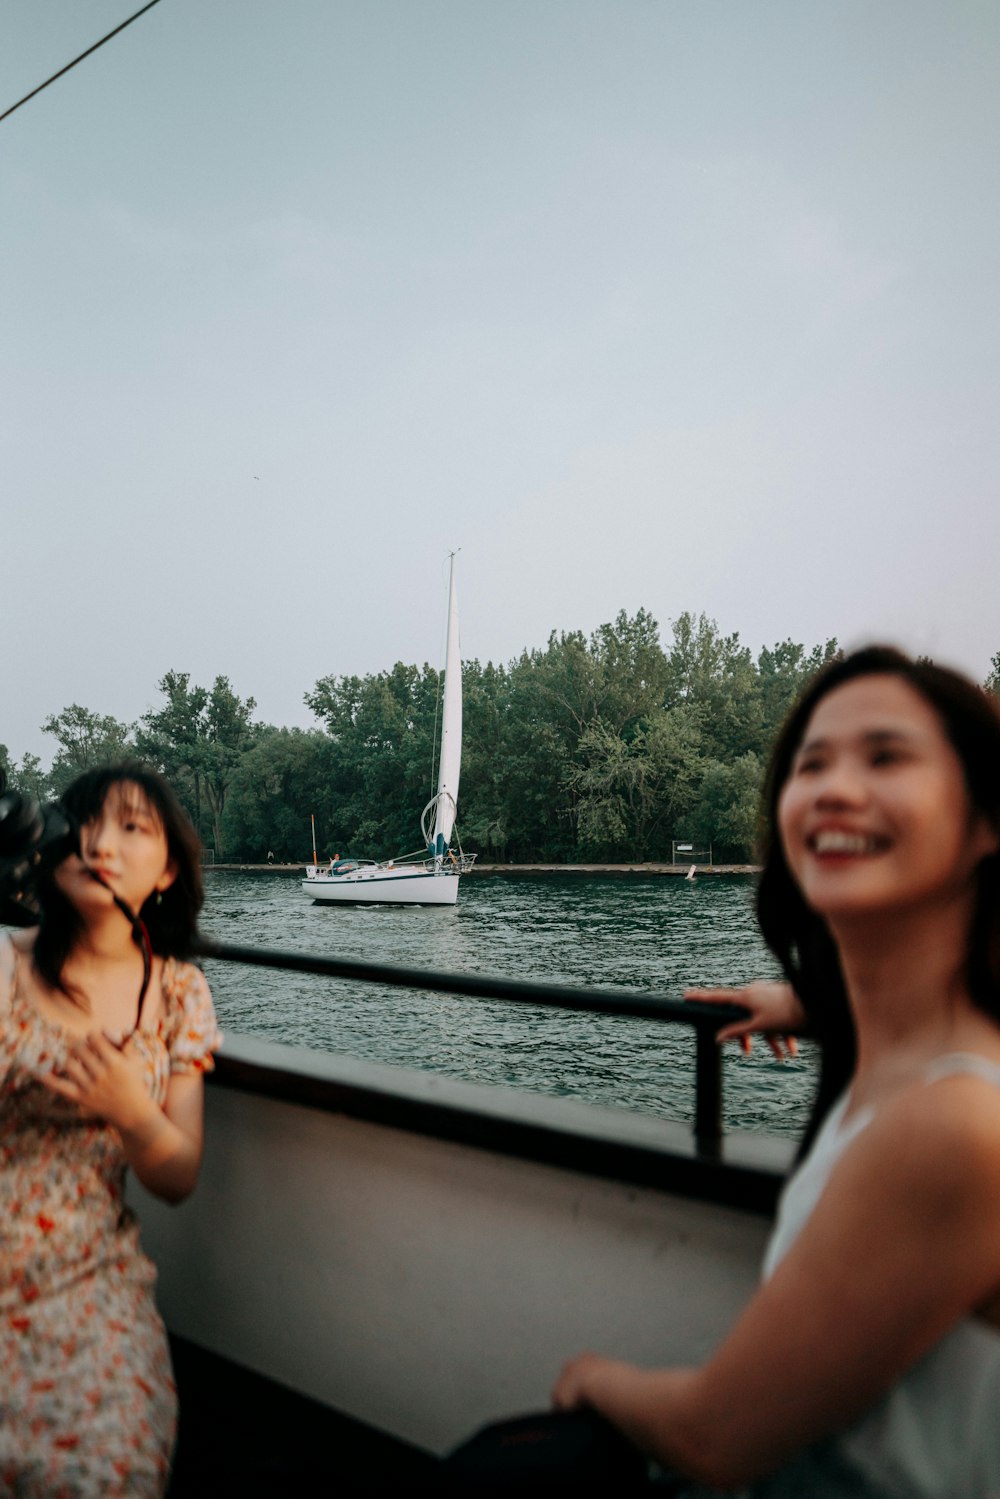 two women standing on a boat in the water